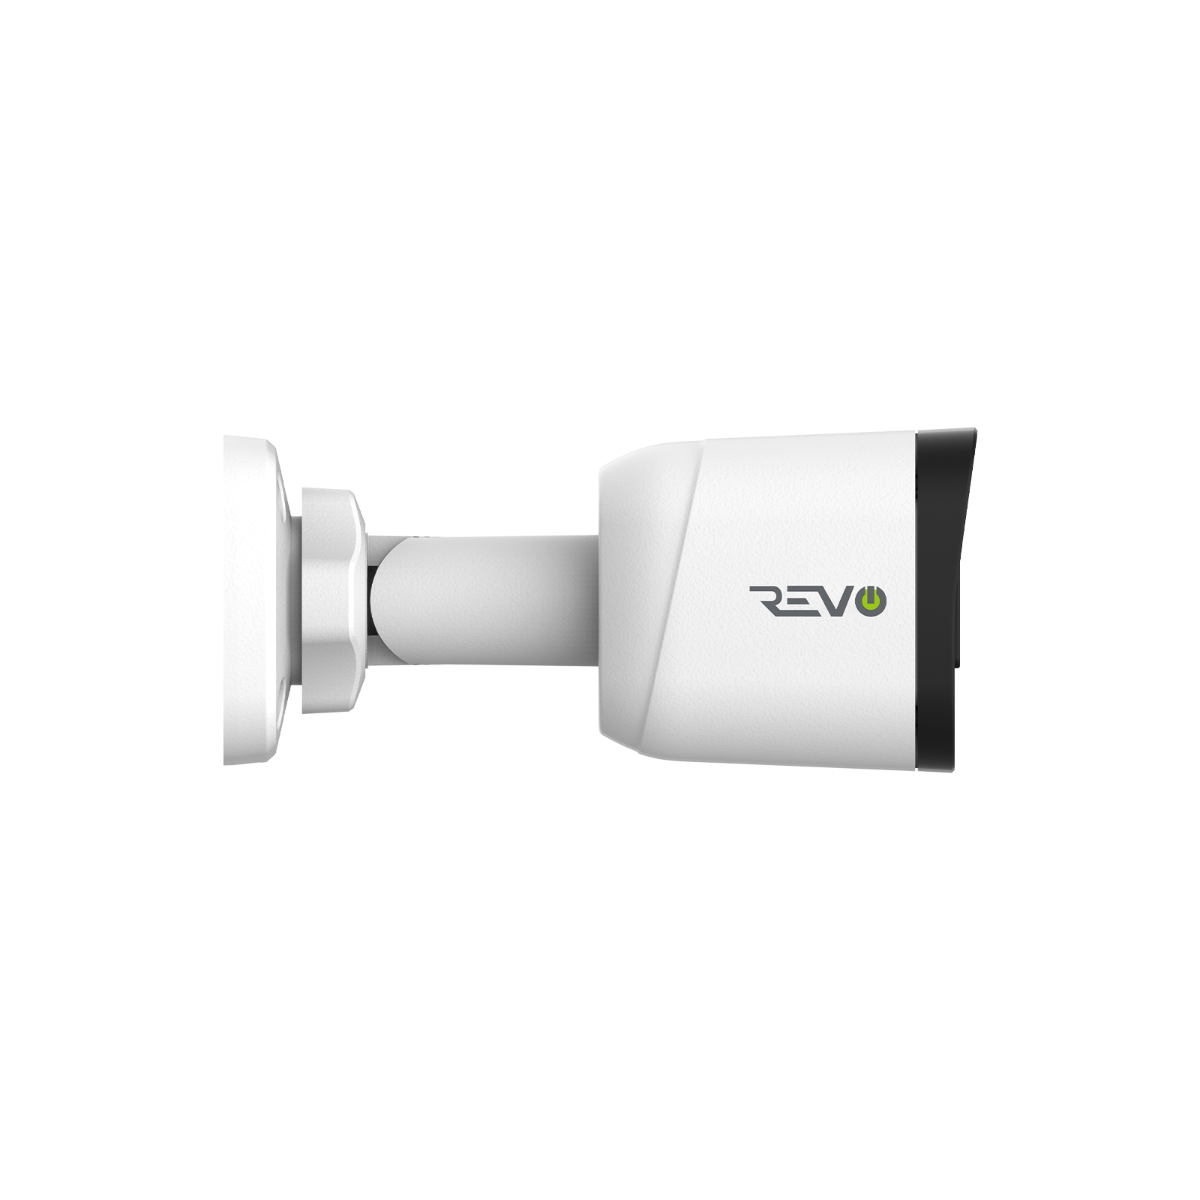 REVO ULTRA Blue Series 4MP Indoor/Outdoor IP Bullet Camera with 100’ Night Vision